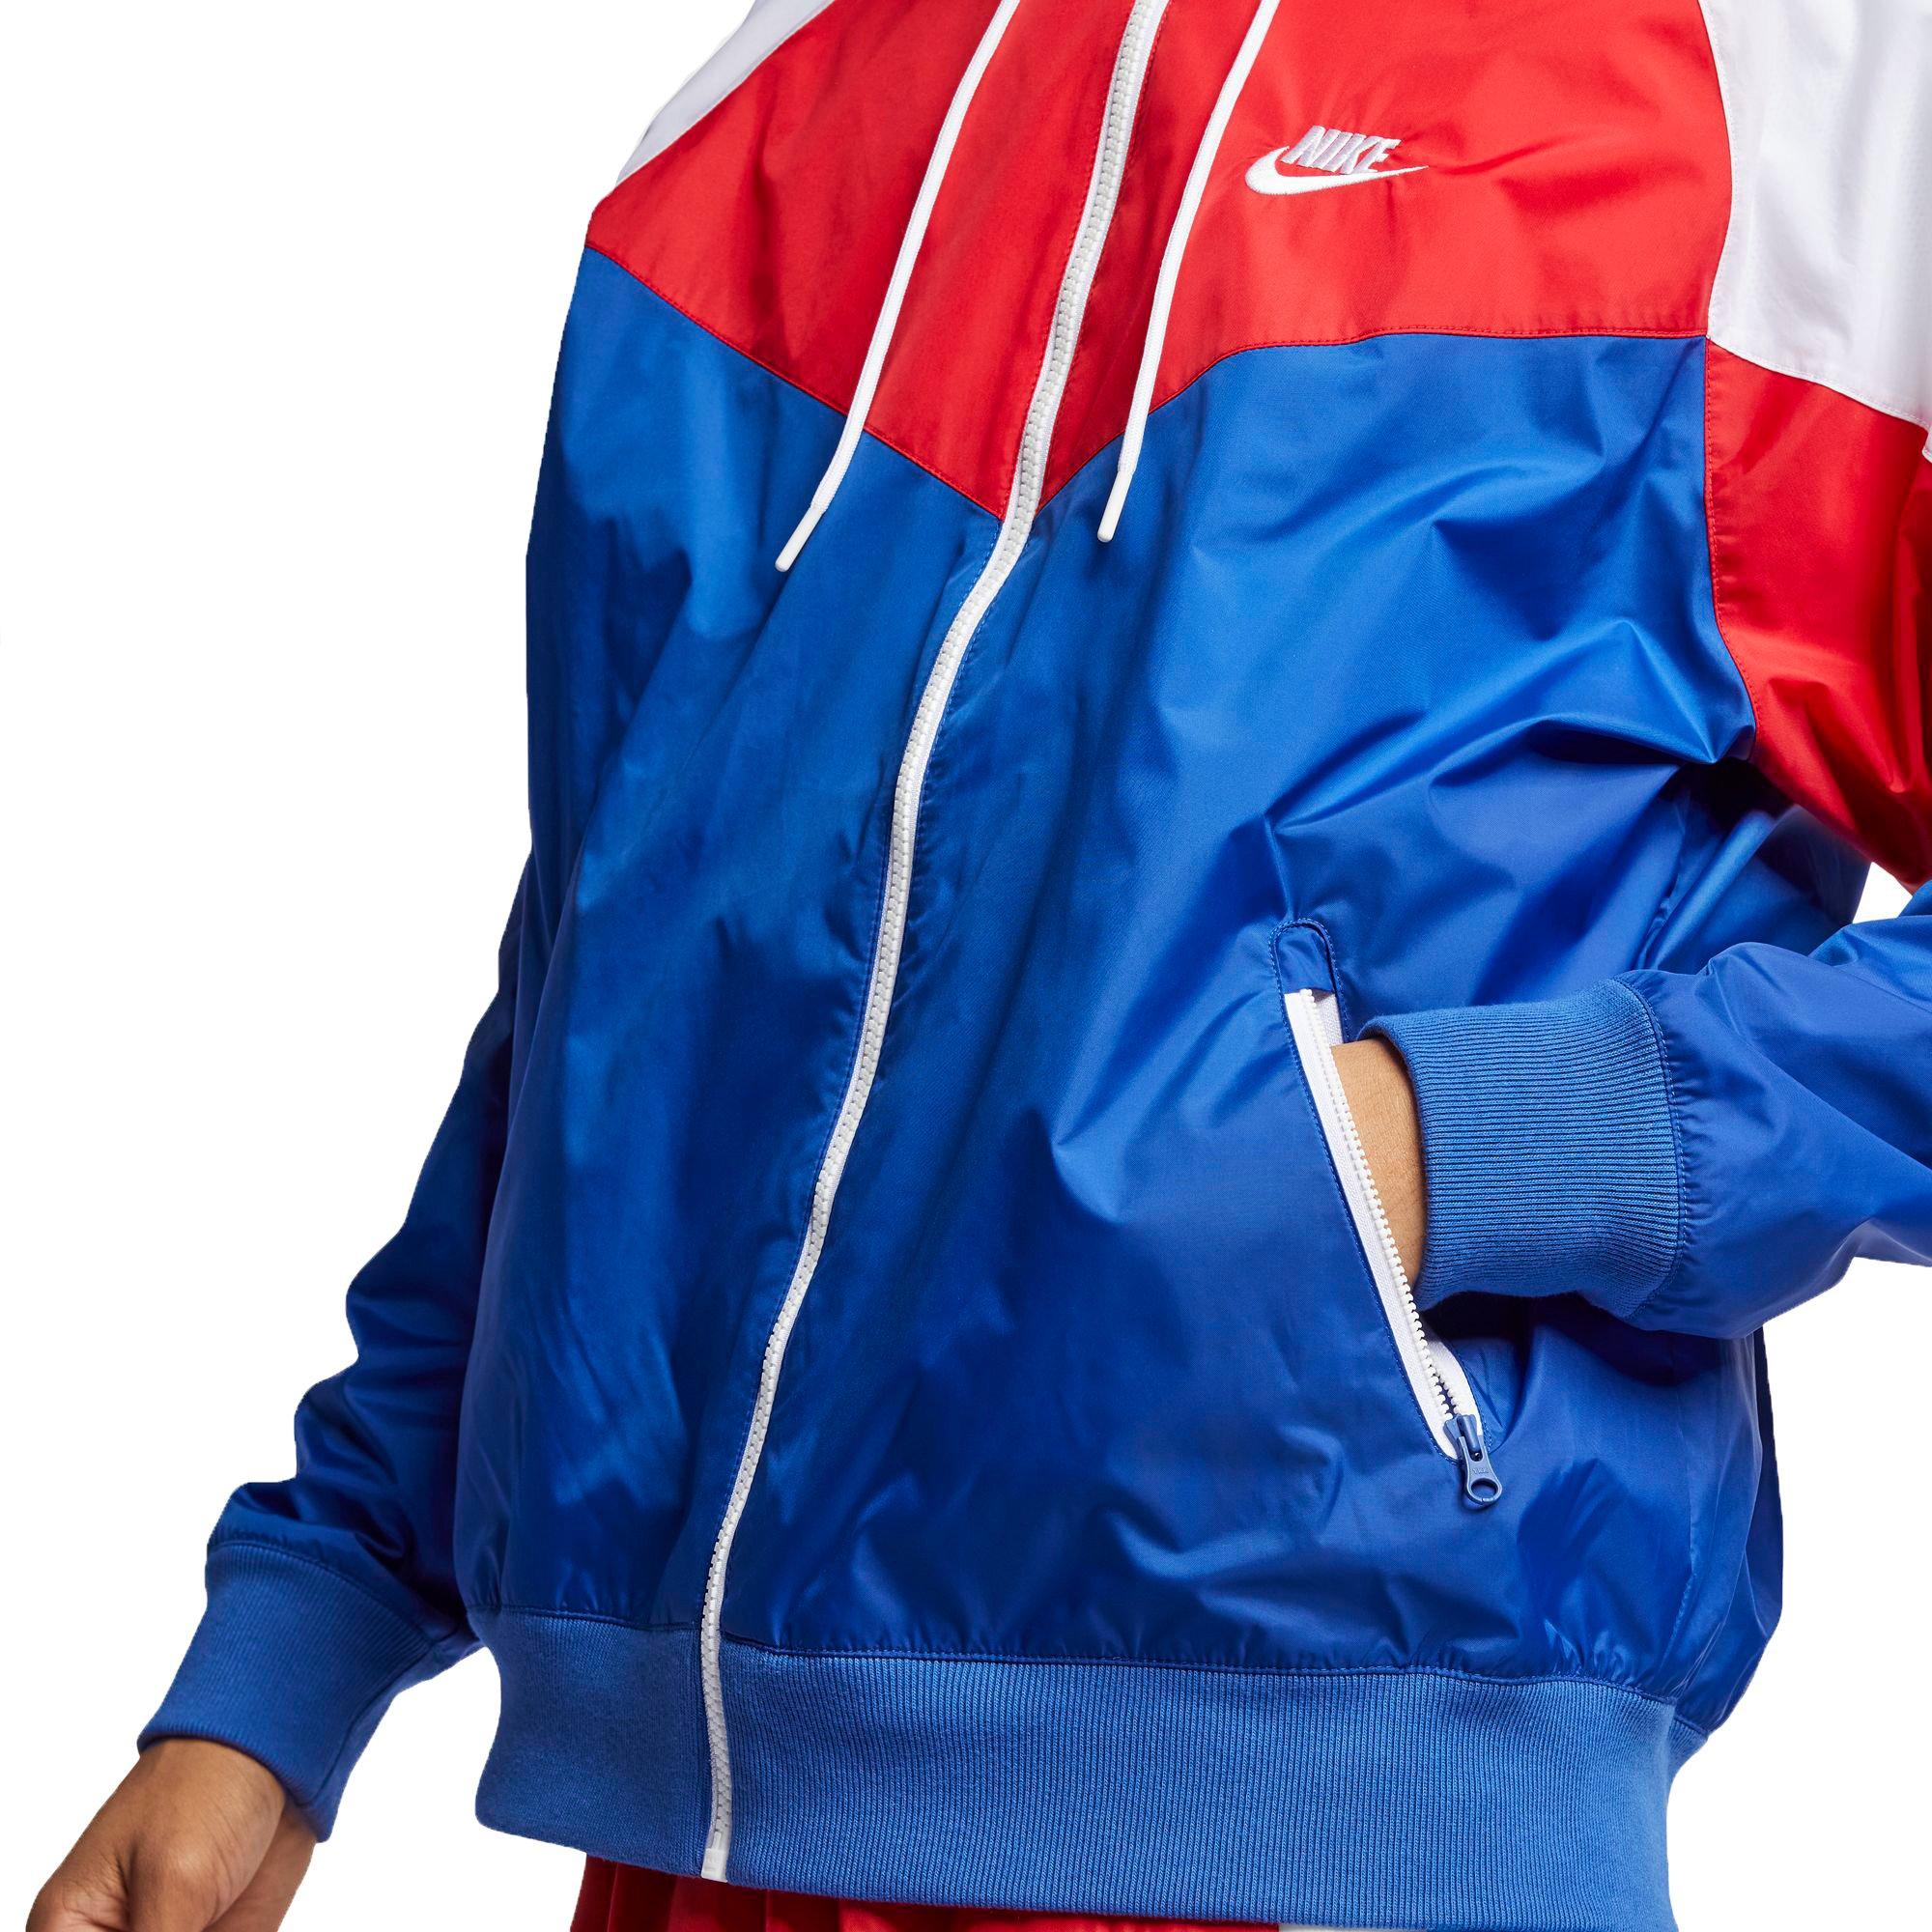 fage nike red white and blue jacket 